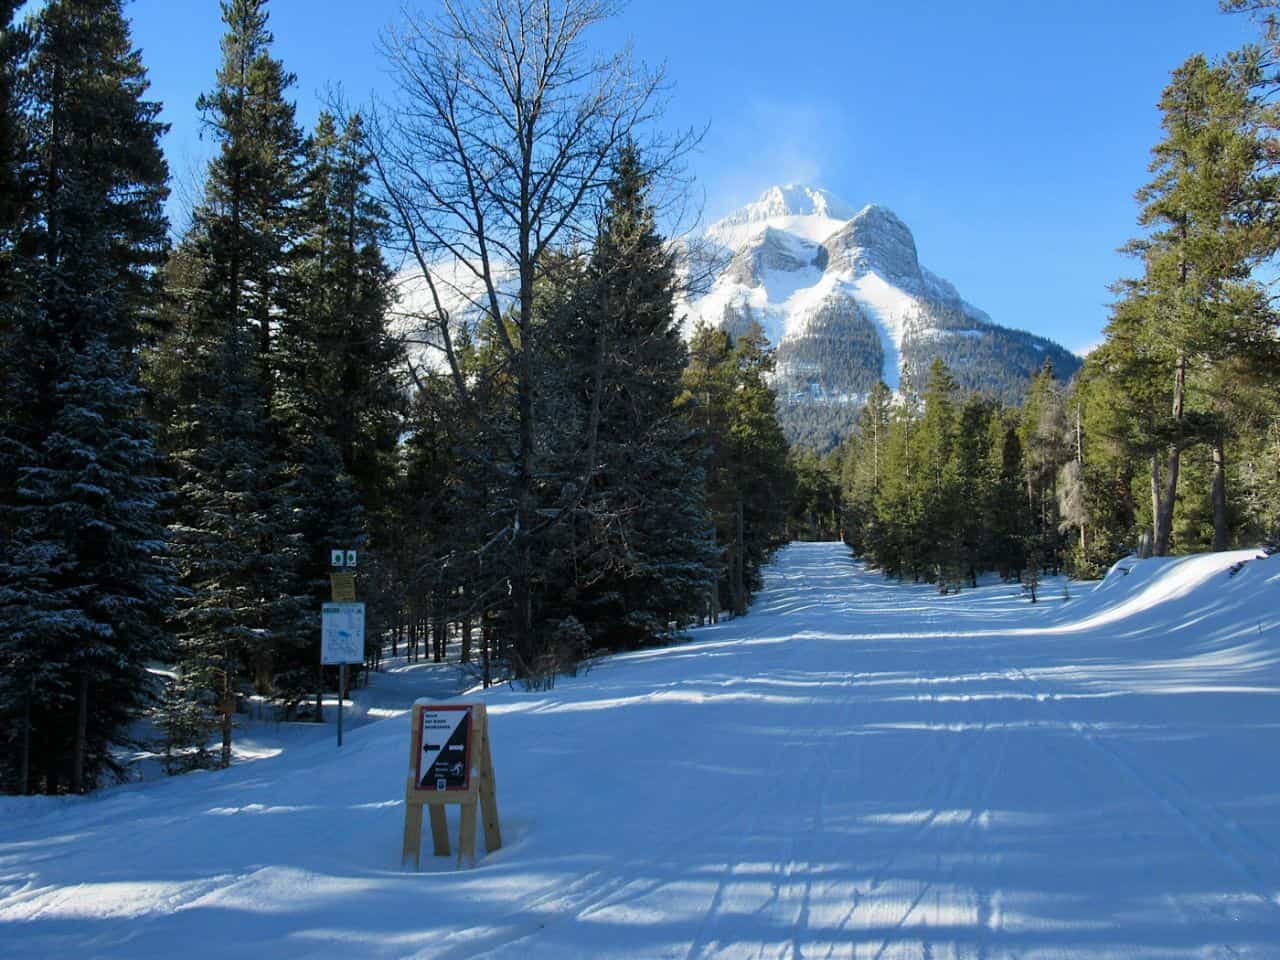 Mountain views while cross country skiing in the Crowsnest Pass with Megan Kopp